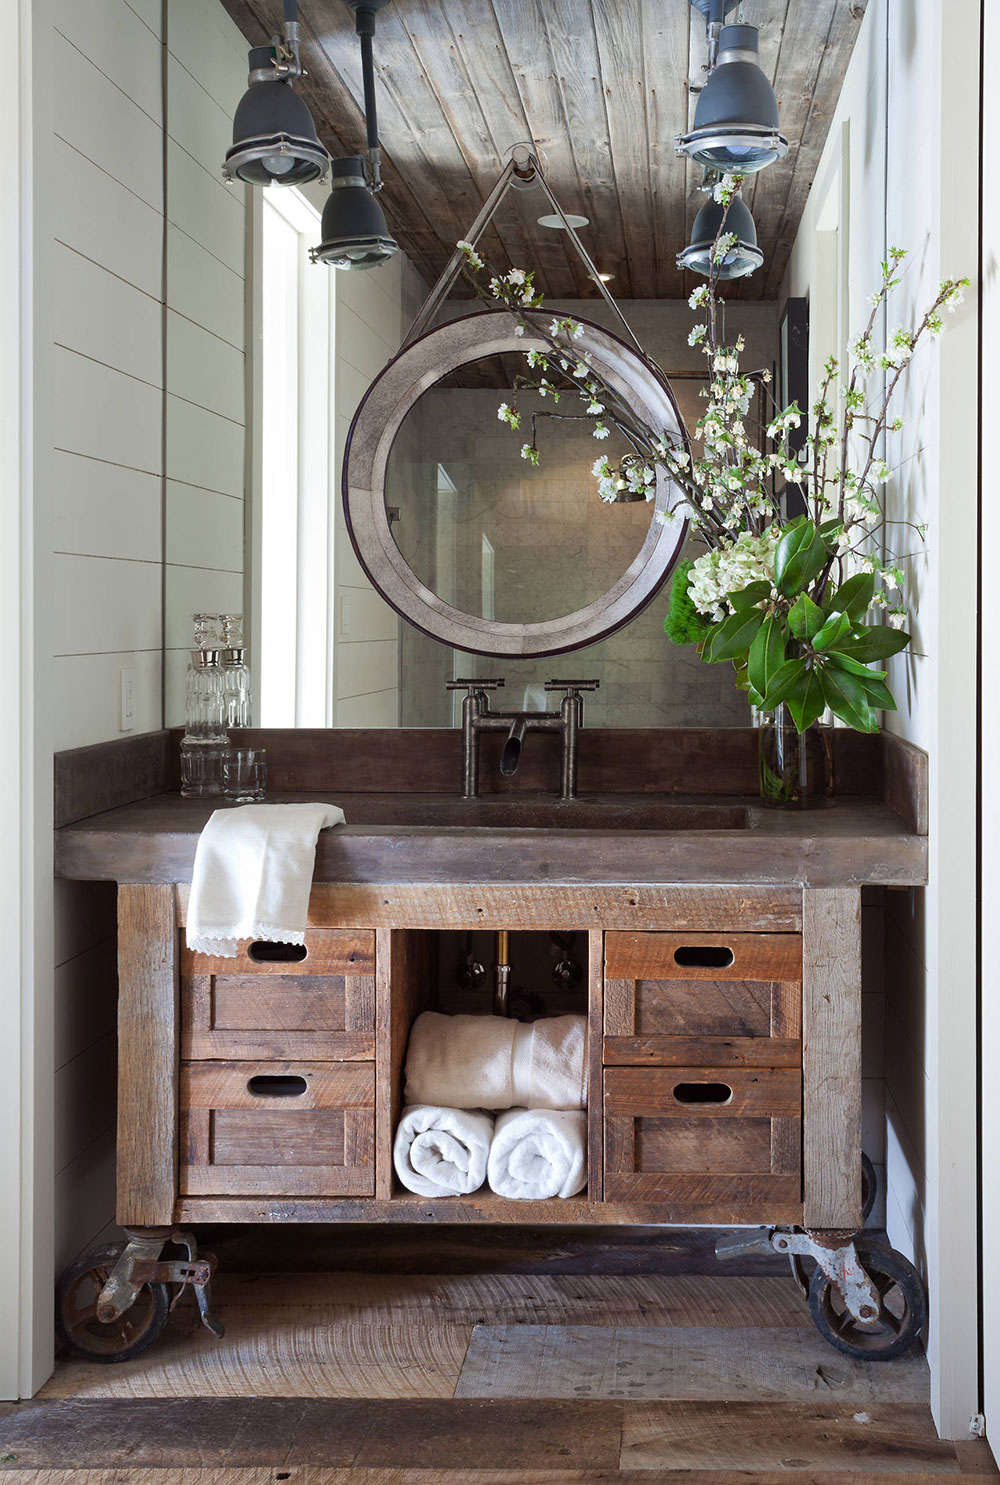 Sticks-and-Stones-by-Post-31-Interiors Where to hang wet towels in a small bathroom